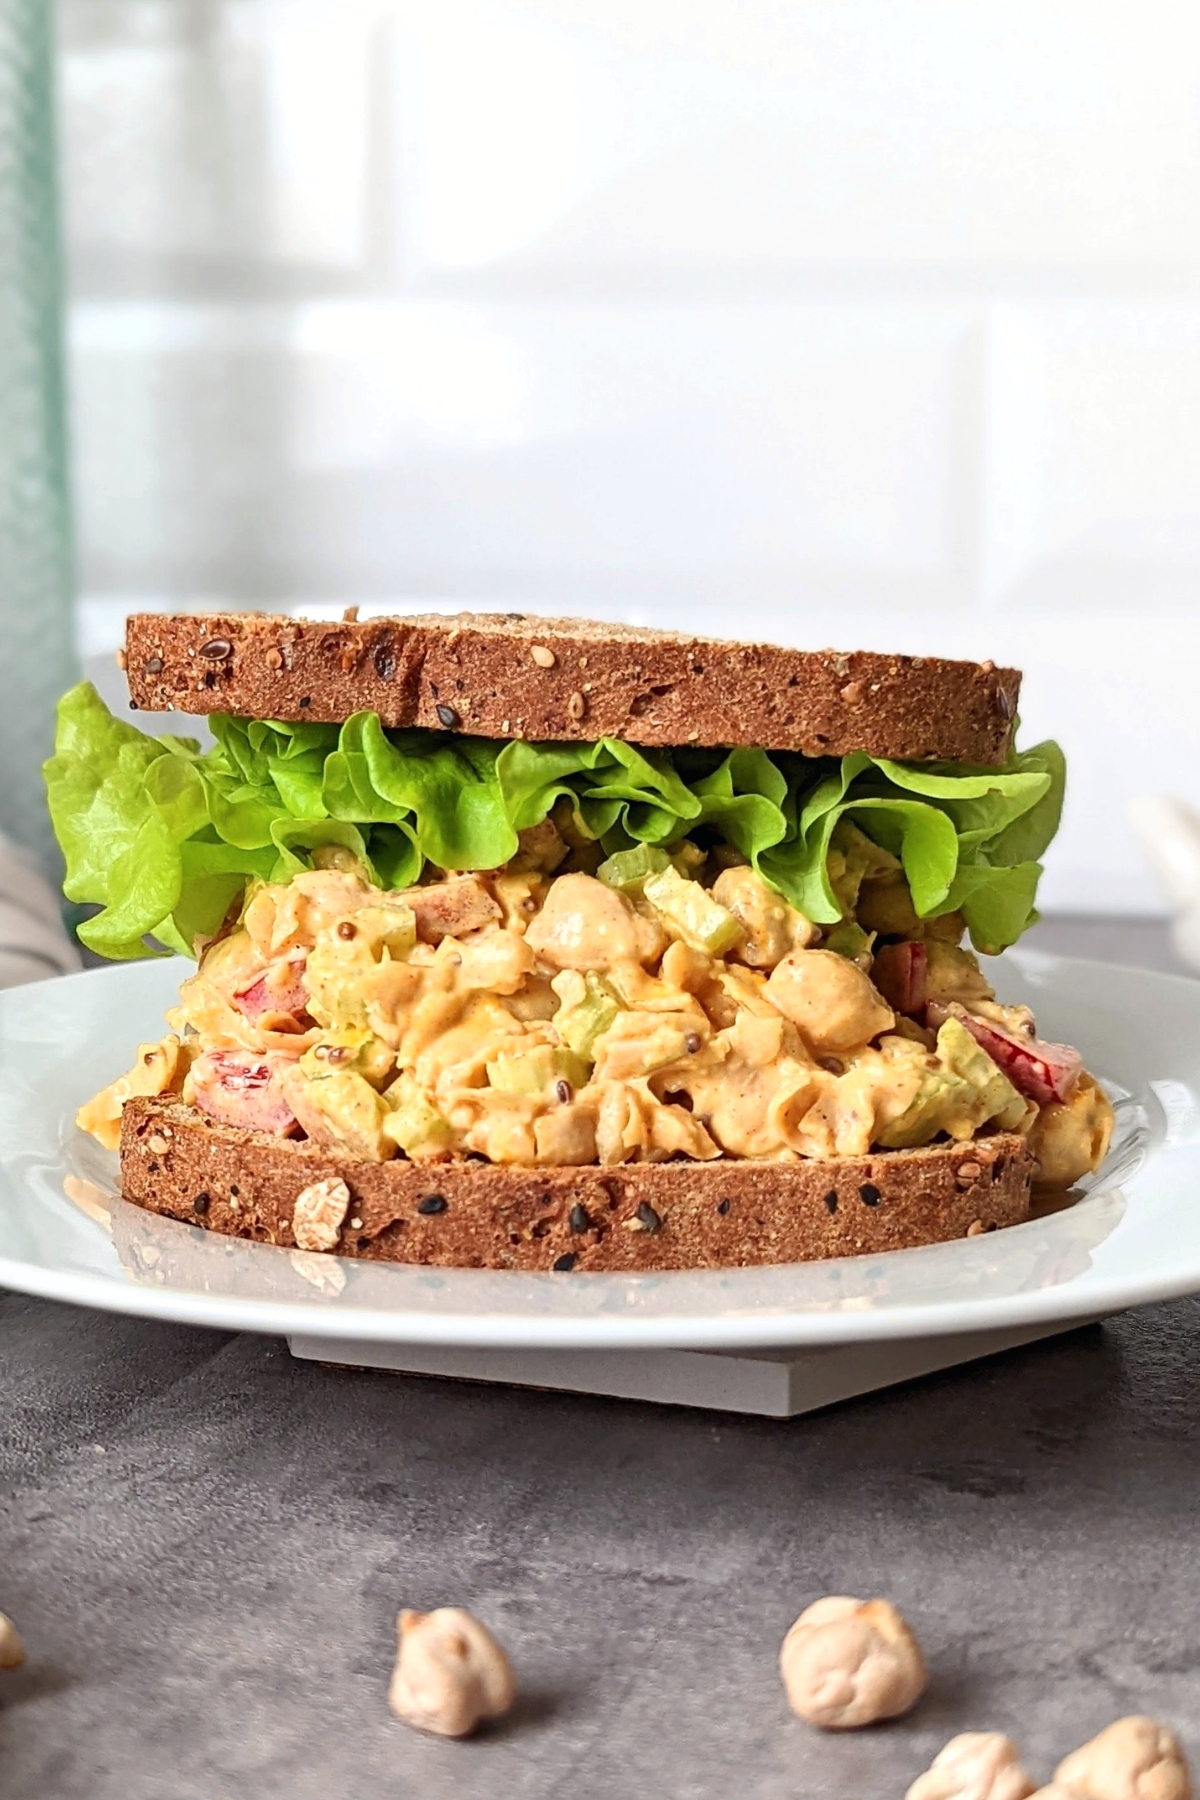 low sodium lunches heart healthy lunch ideas with low sodium chickpeas and low salt bread or a lettuce wrap